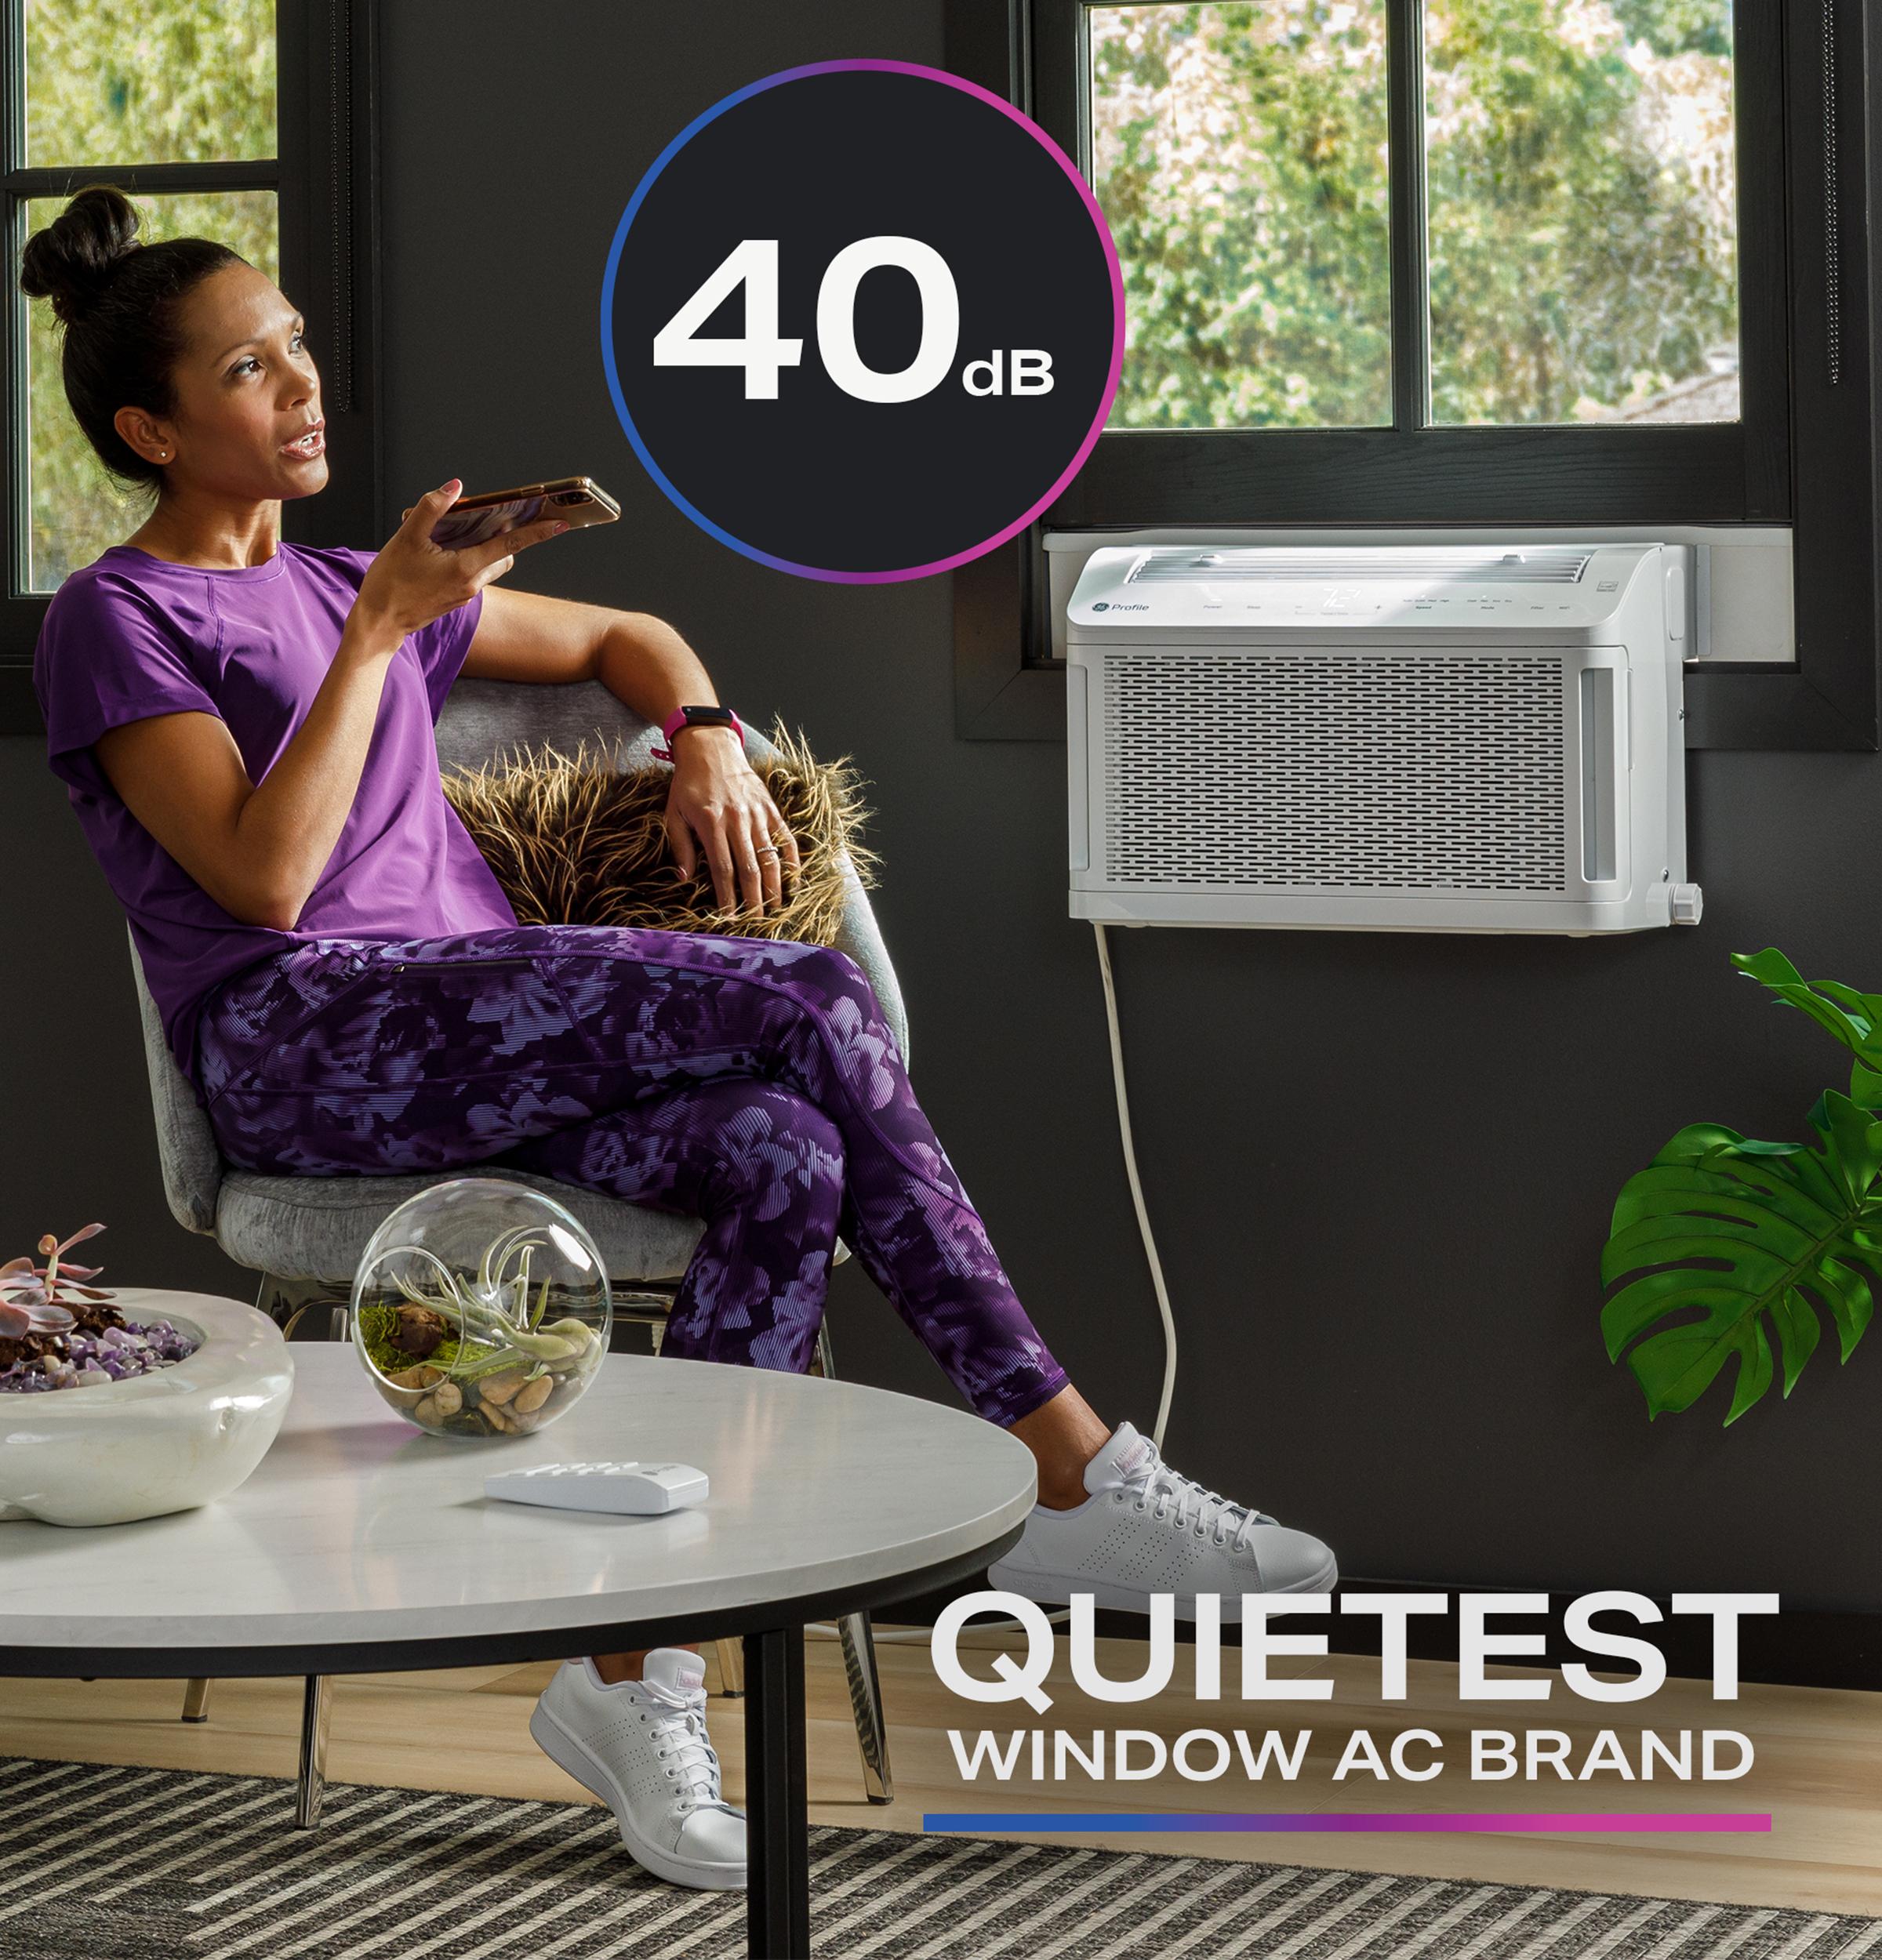 GE Profile ClearView™ ENERGY STAR® 10,300 BTU Inverter Smart Ultra Quiet Window Air Conditioner for Medium Rooms up to 450 sq. ft.